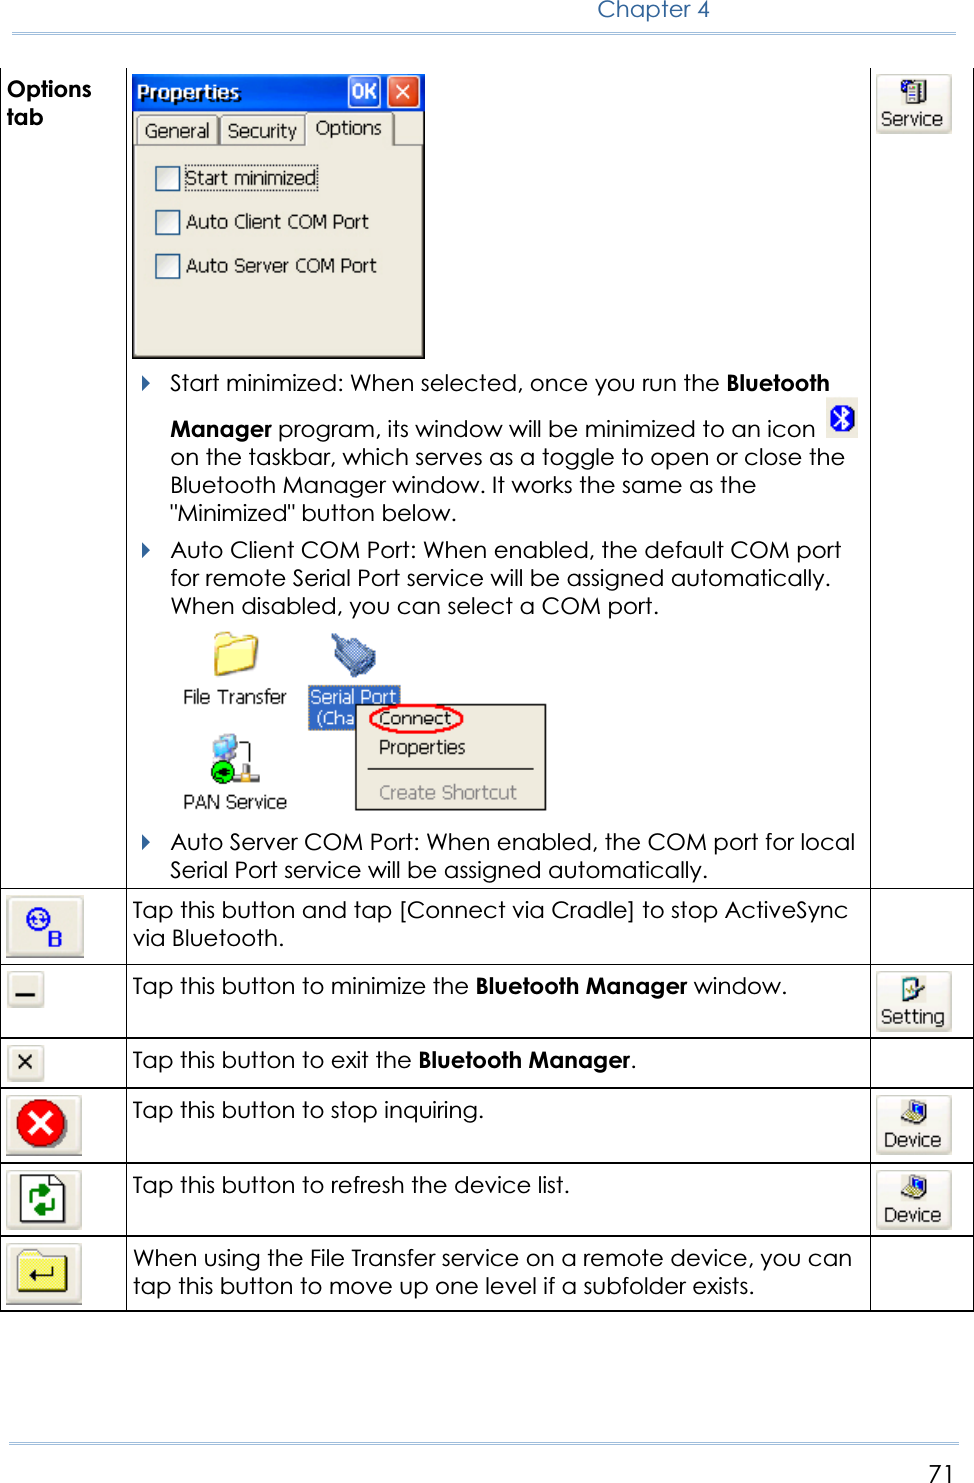 71Chapter 4OptionstabStart minimized: When selected, once you run the BluetoothManager program, its window will be minimized to an icon on the taskbar, which serves as a toggle to open or close the Bluetooth Manager window. It works the same as the &quot;Minimized&quot; button below. Auto Client COM Port: When enabled, the default COM port for remote Serial Port service will be assigned automatically. When disabled, you can select a COM port. Auto Server COM Port: When enabled, the COM port for local Serial Port service will be assigned automatically. Tap this button and tap [Connect via Cradle] to stop ActiveSync via Bluetooth. Tap this button to minimize the Bluetooth Manager window. Tap this button to exit the Bluetooth Manager.Tap this button to stop inquiring. Tap this button to refresh the device list. When using the File Transfer service on a remote device, you can tap this button to move up one level if a subfolder exists. 